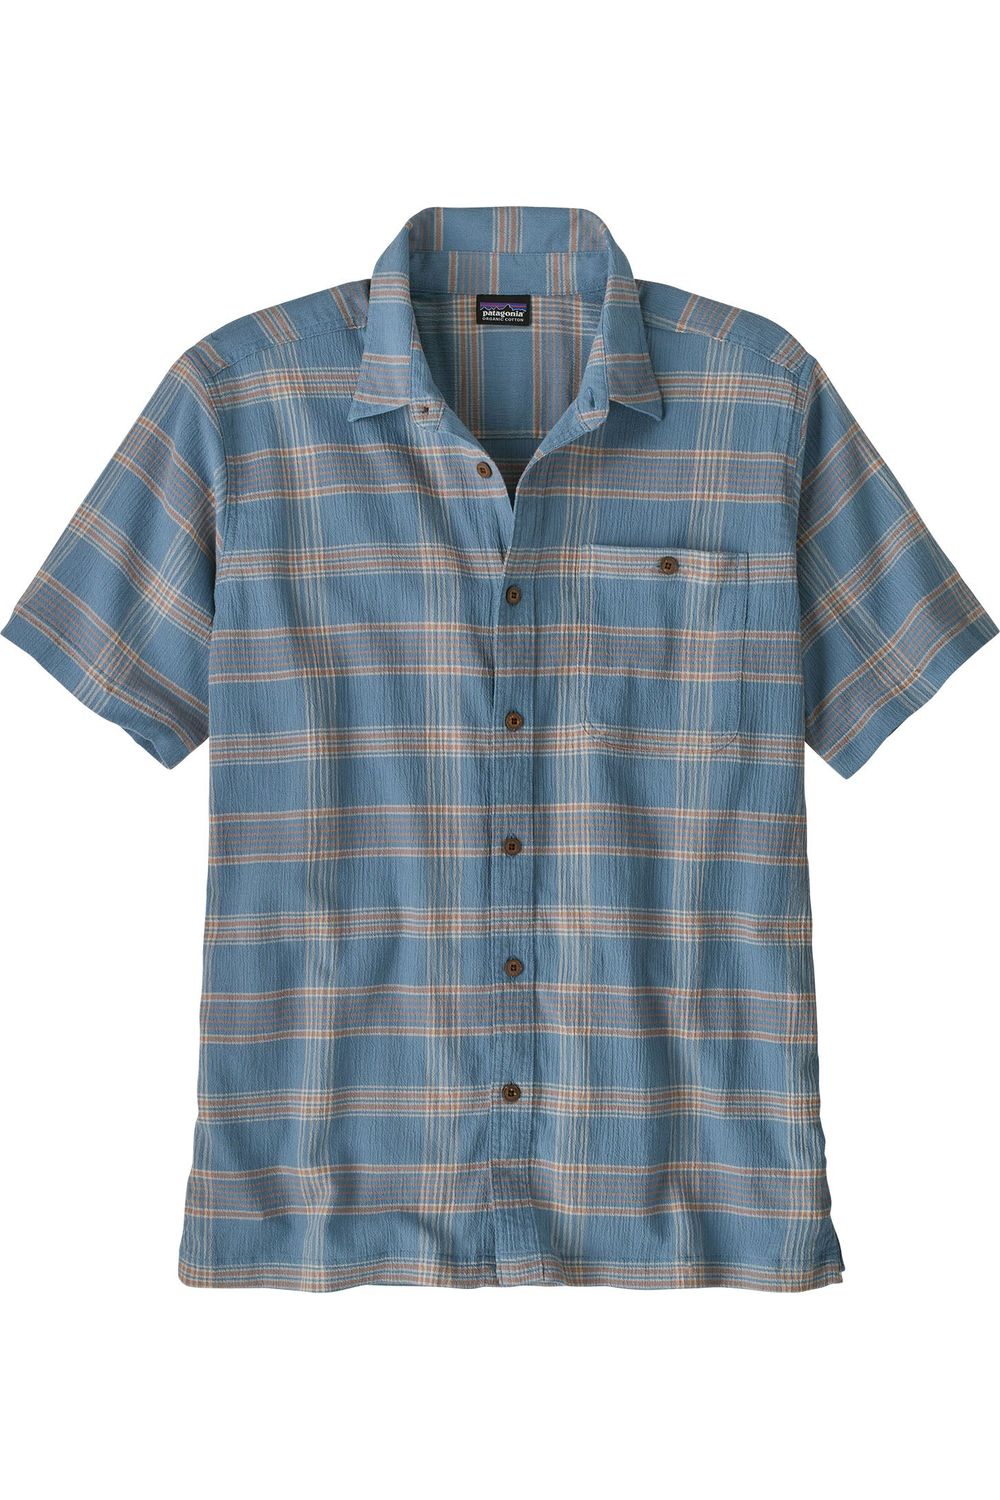 Patagonia Men's A/C Shirt Discovery: Light Plume Grey